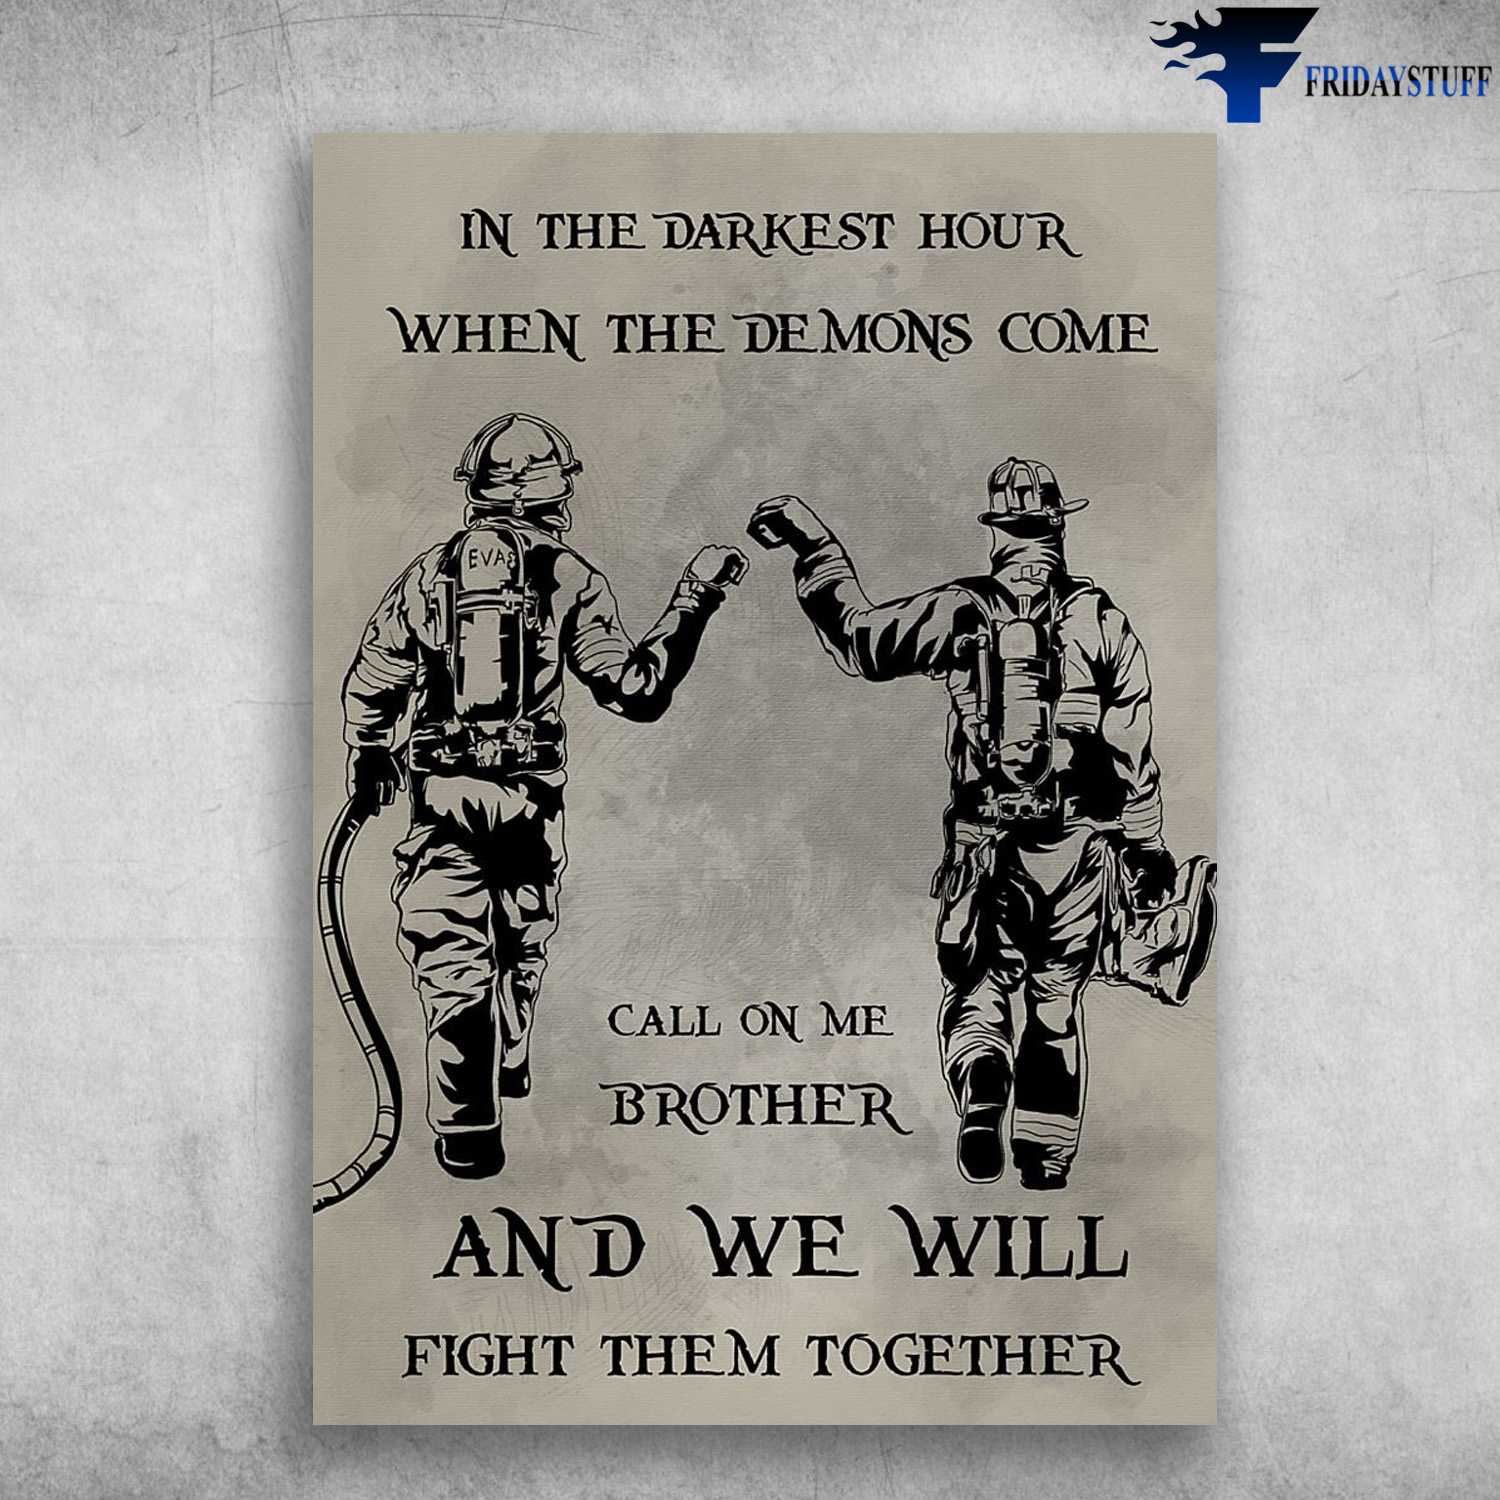 Firefighter Poster, In The Darkest Hour, When The Demons Come, Call On Me Brother, And We Will Fight Them Together